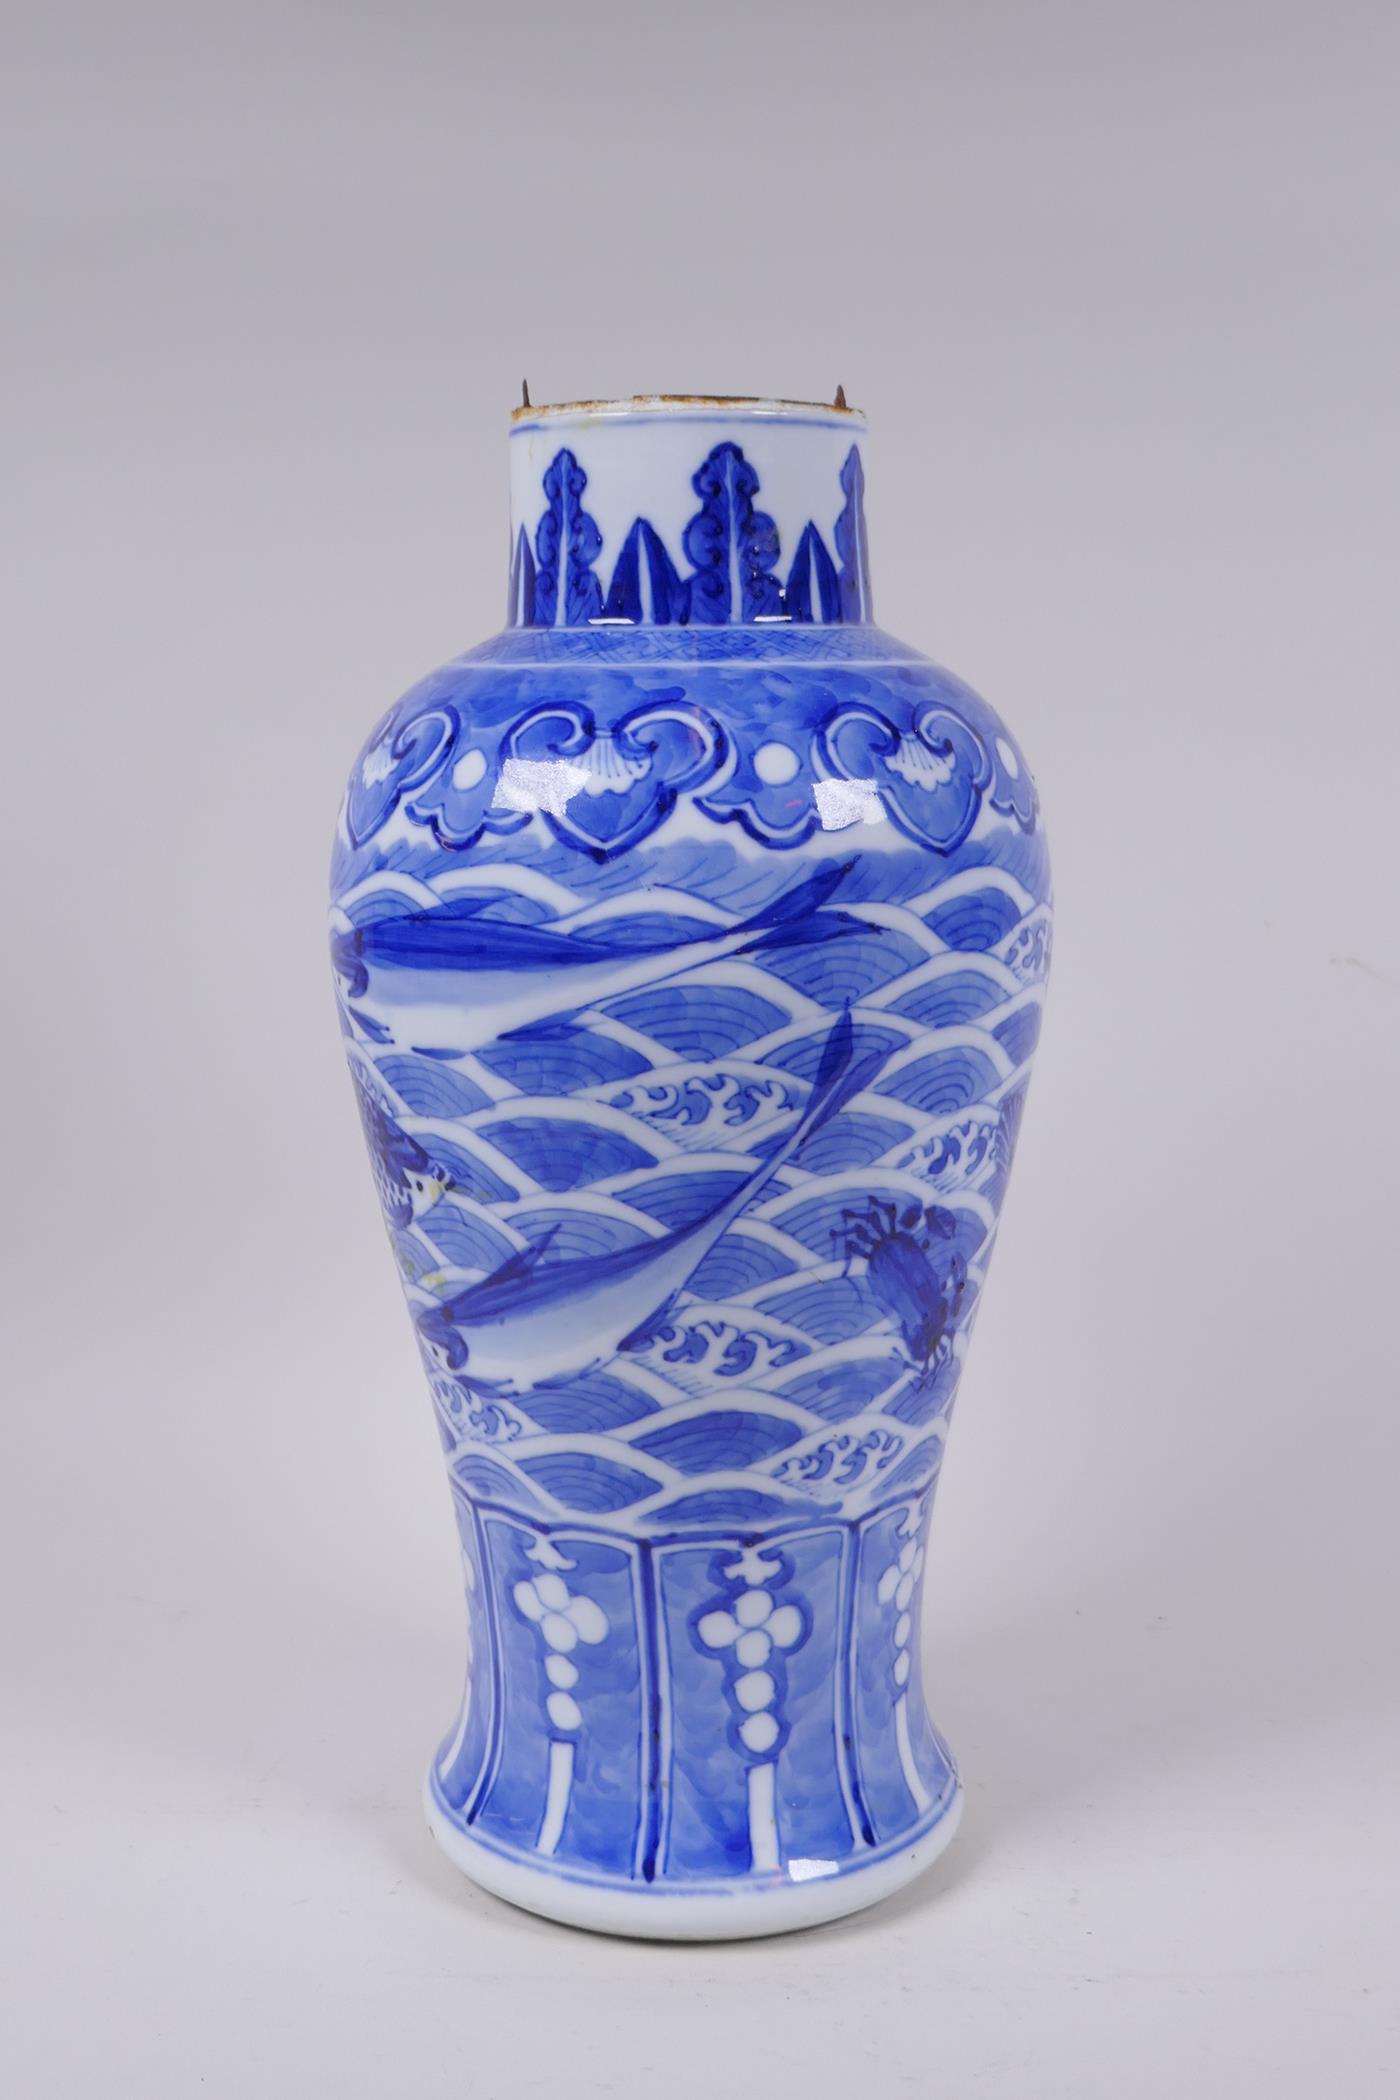 A C19th Chinese blue and white porcelain vase decorated with carp and crabs, Xuande 4 character mark - Image 2 of 9